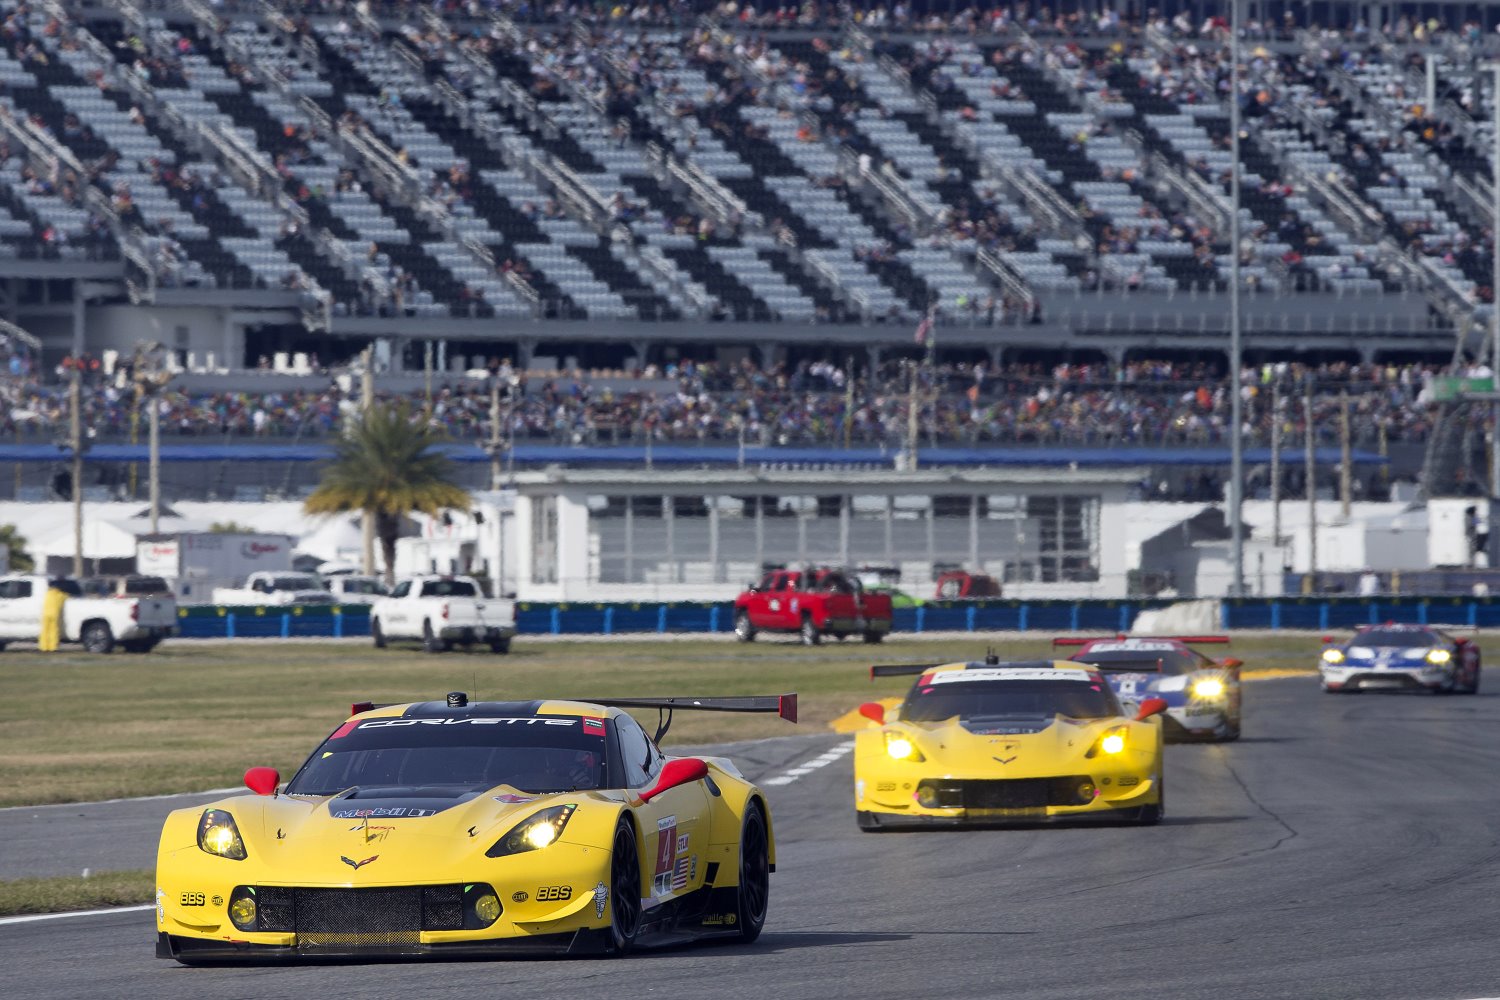 The Nos 4 and 3 Corvettes put it to Ford, Porsche, Ferrari and Lamborghini in 2016. Can they do it again?